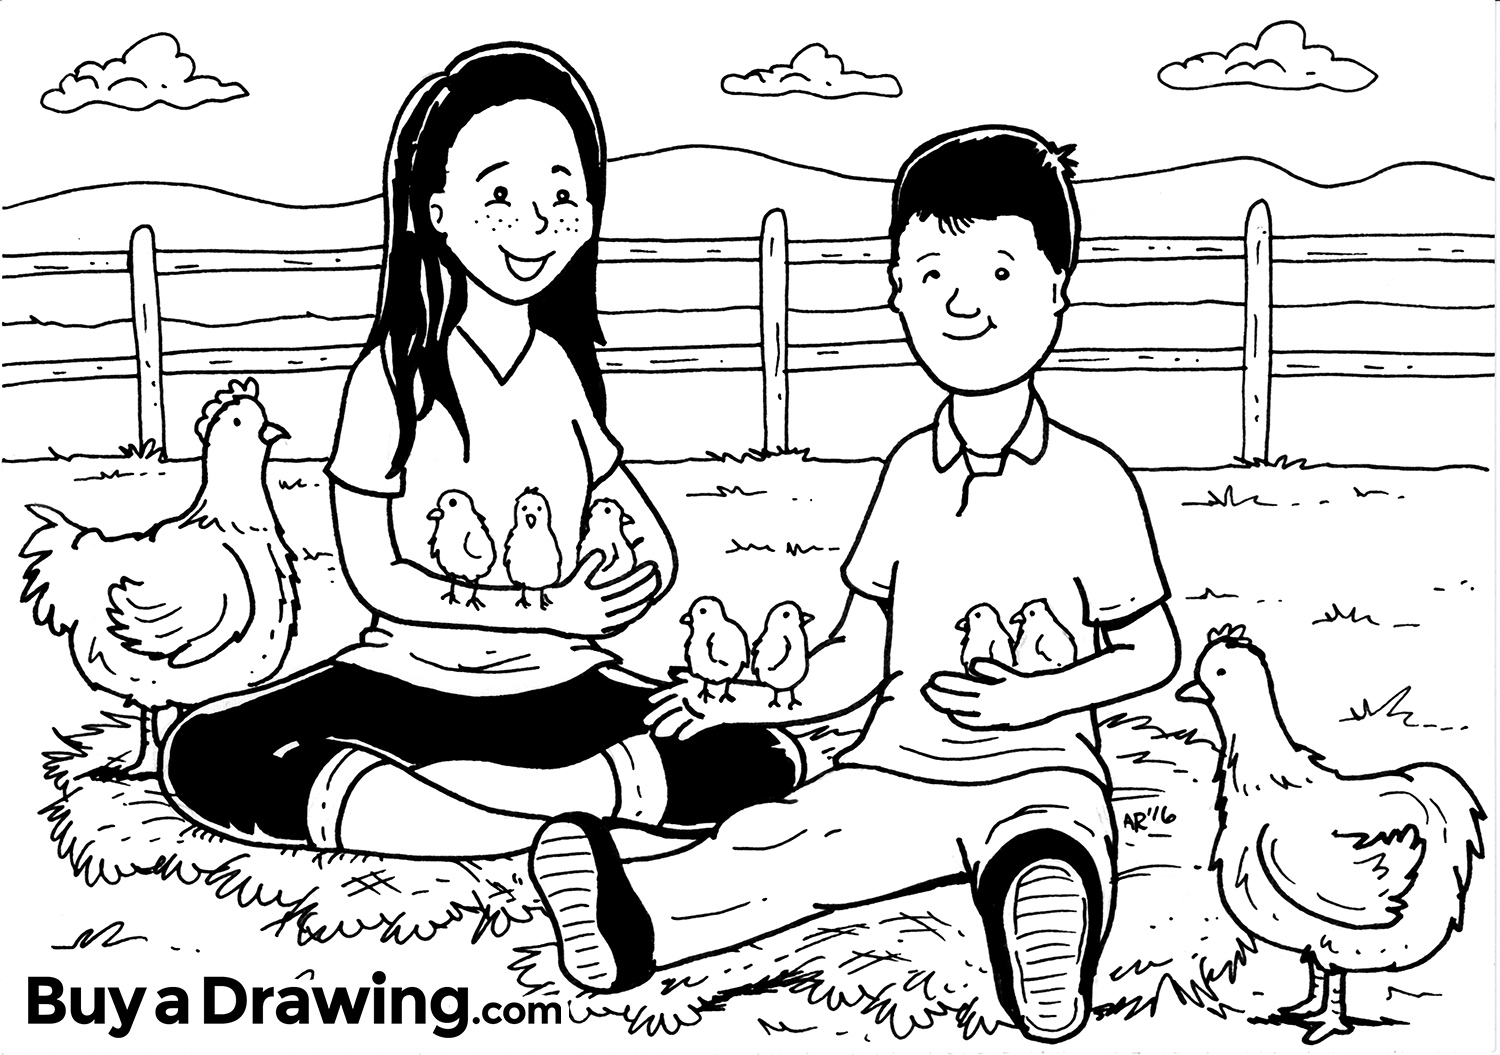 Custom Cartoon Portrait Drawing of a Sister and Brother